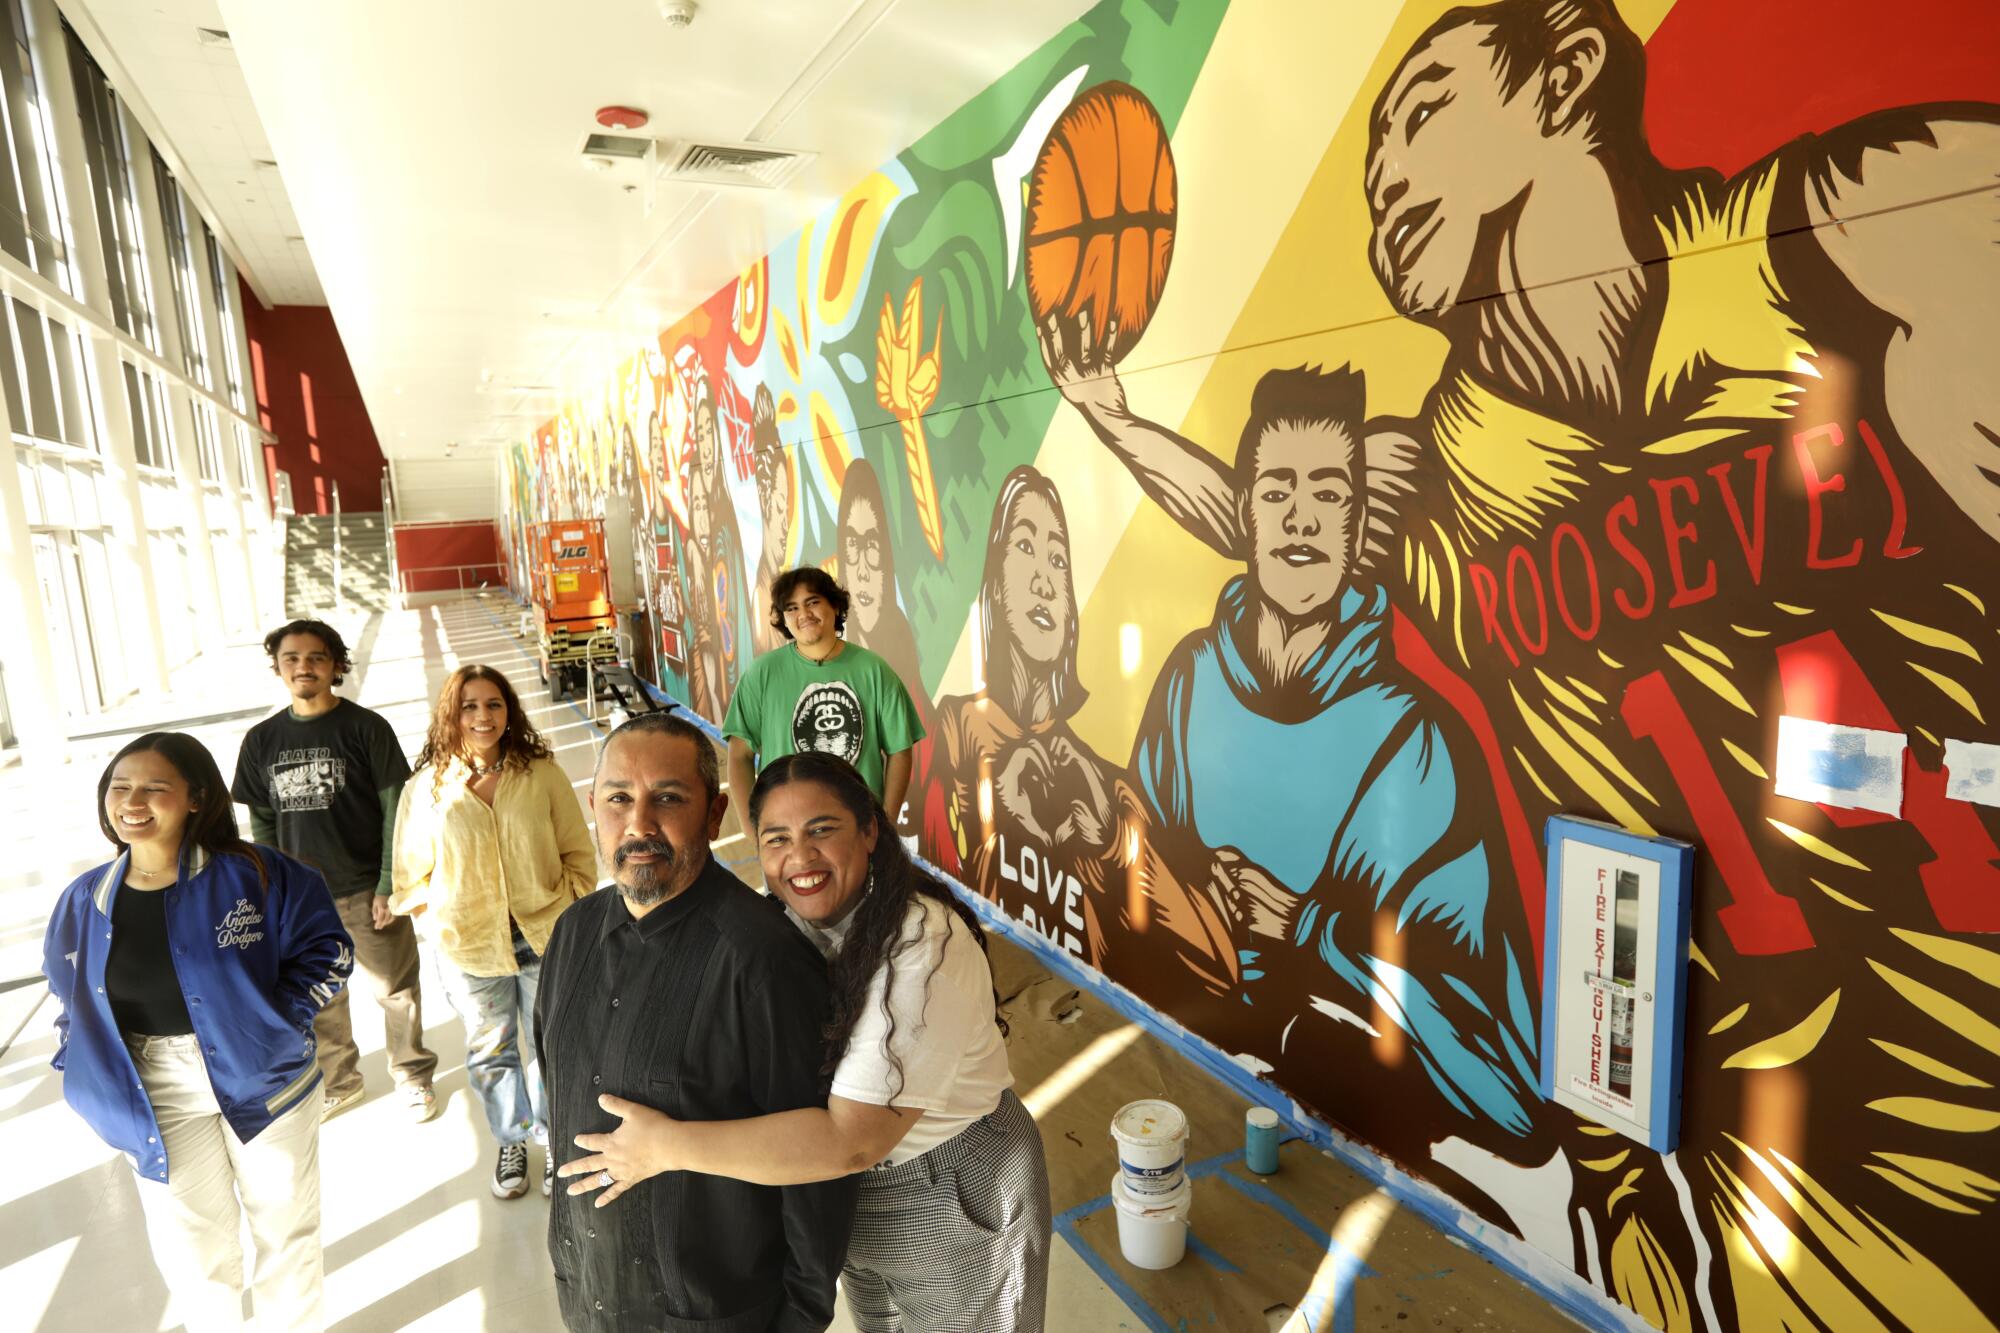 Artists Alfonso Aceves, Adriana Carranza, both foreground, and the their children stand next to the mural